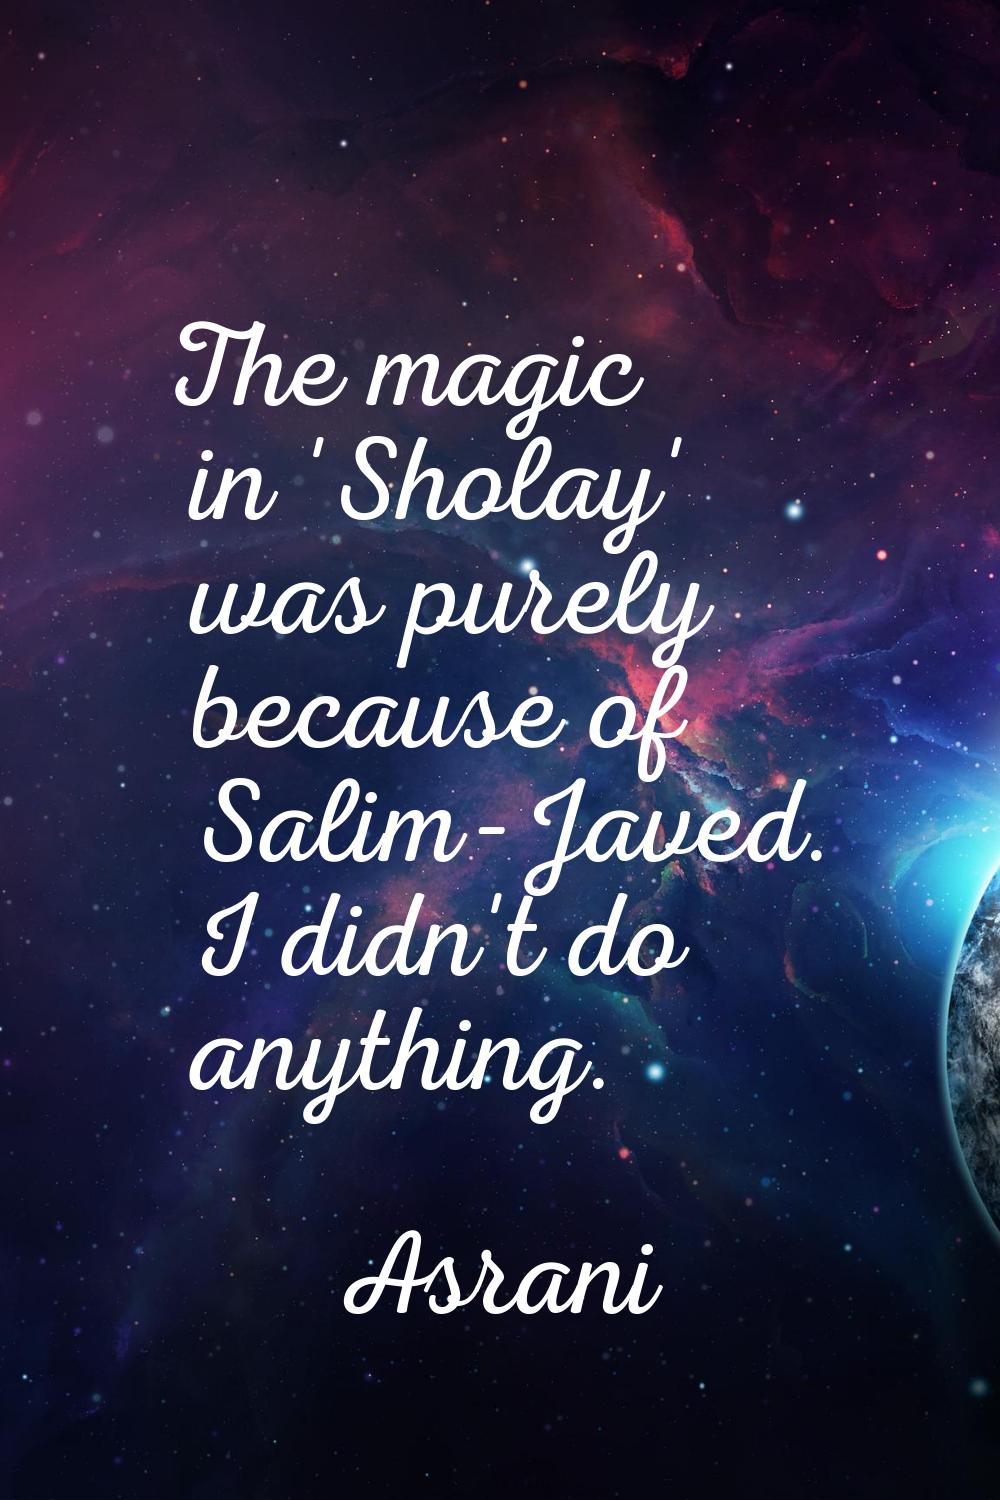 The magic in 'Sholay' was purely because of Salim-Javed. I didn't do anything.